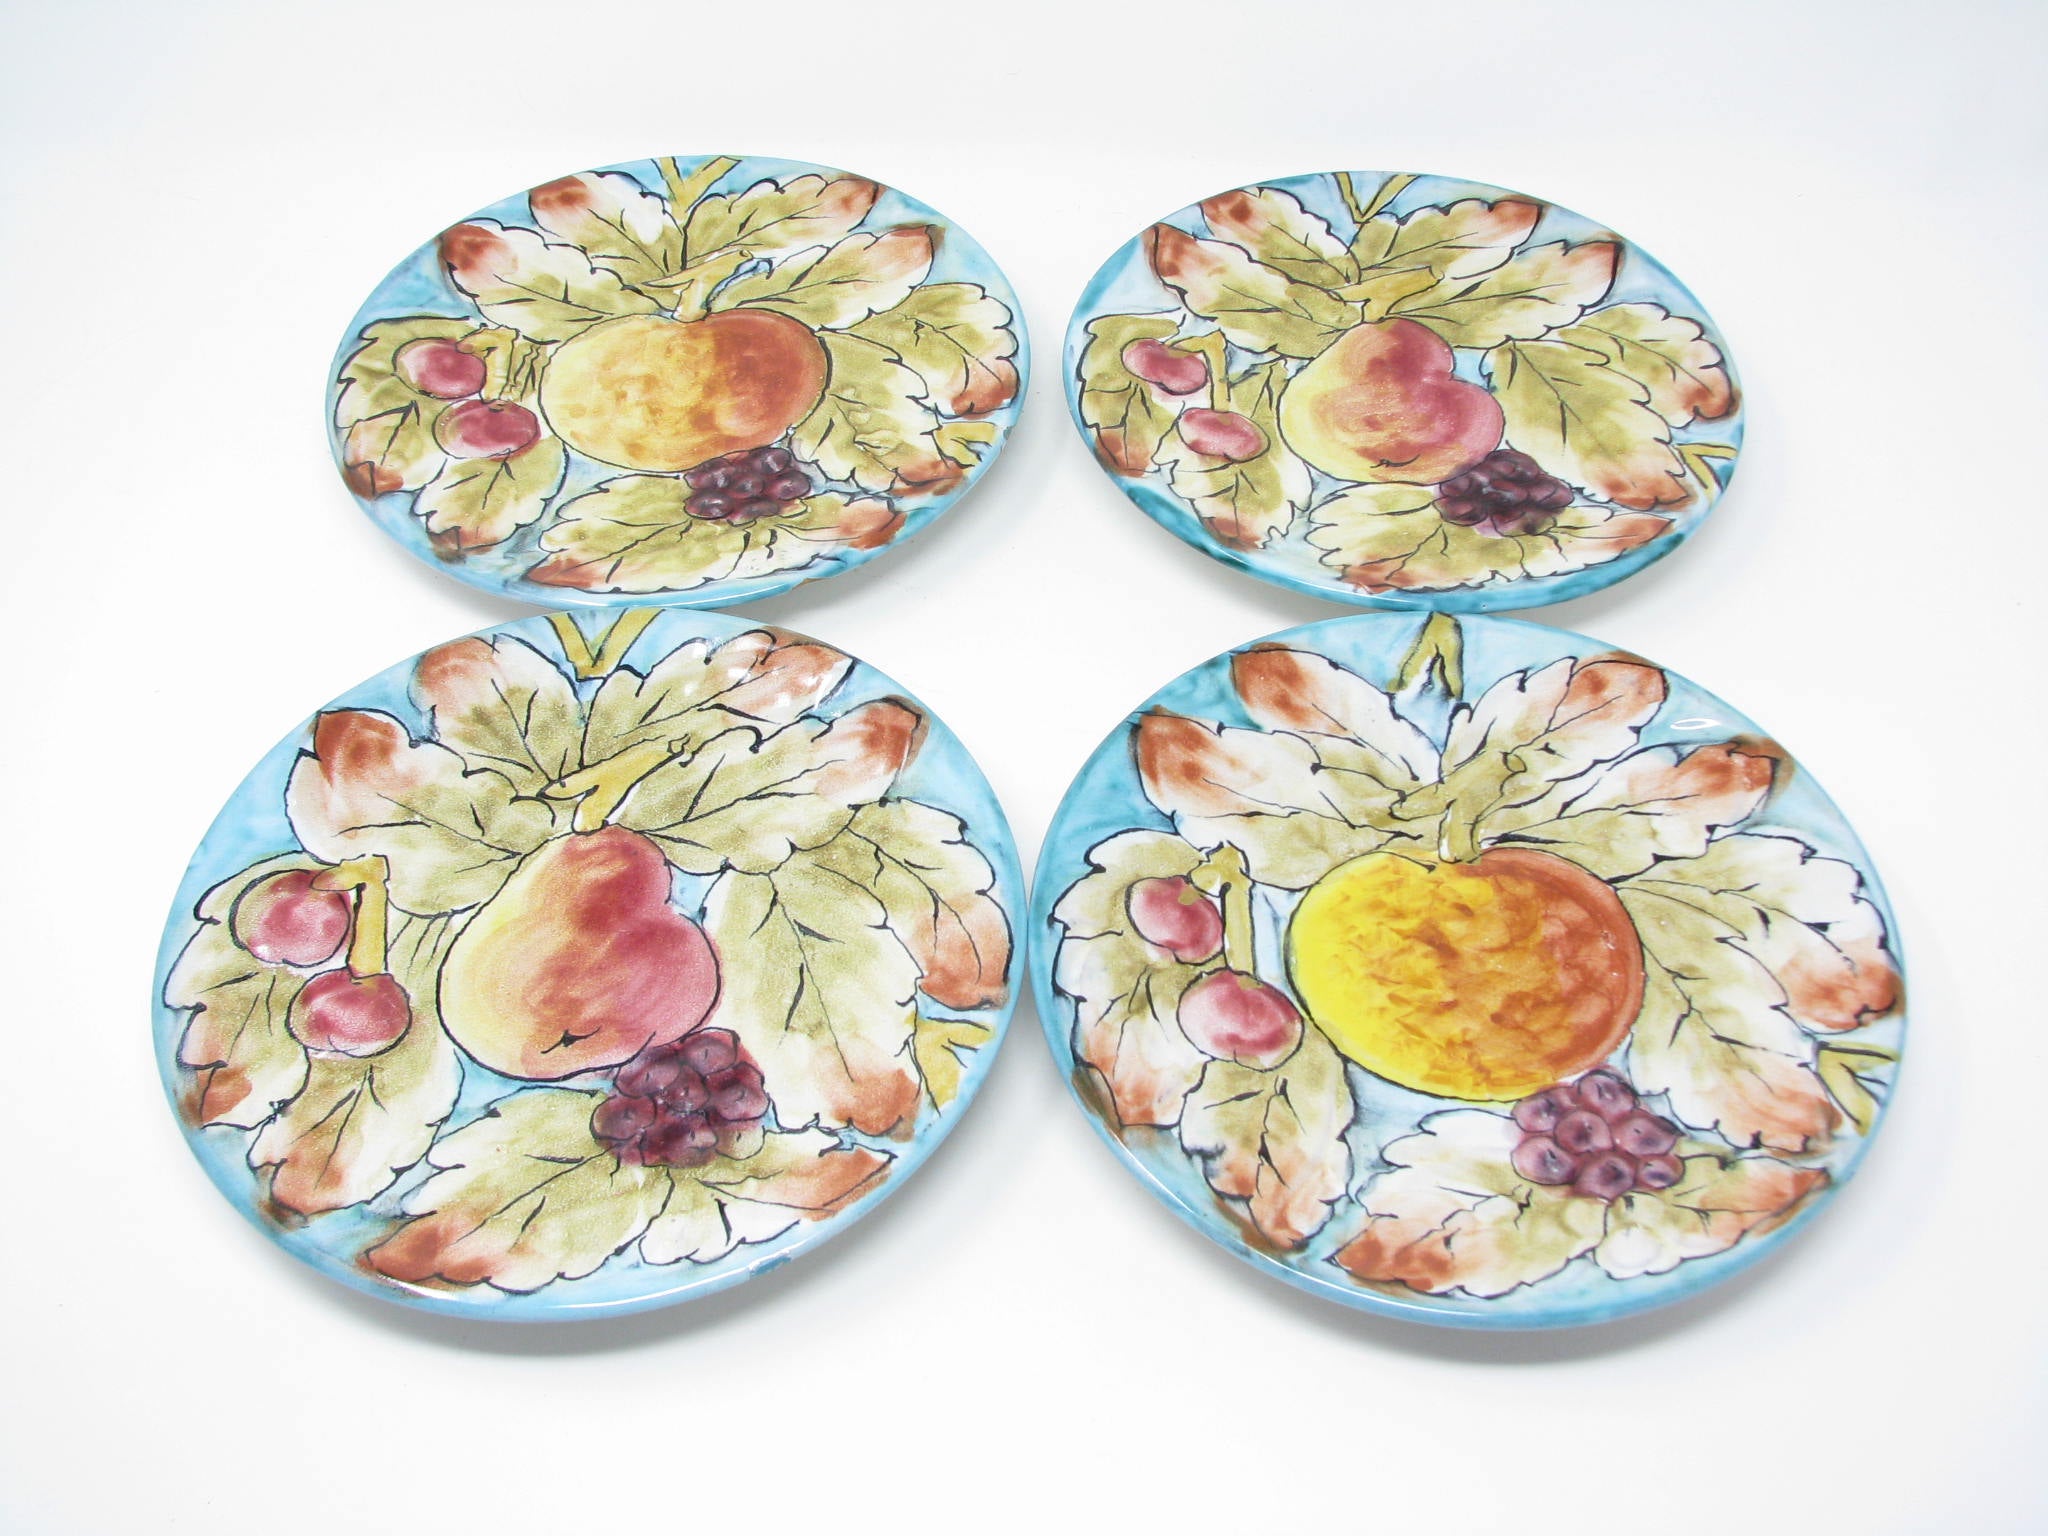 edgebrookhouse - Vintage Italian Pottery Salad Plates with Hand-Painted Fruit Designs - 4 Pieces